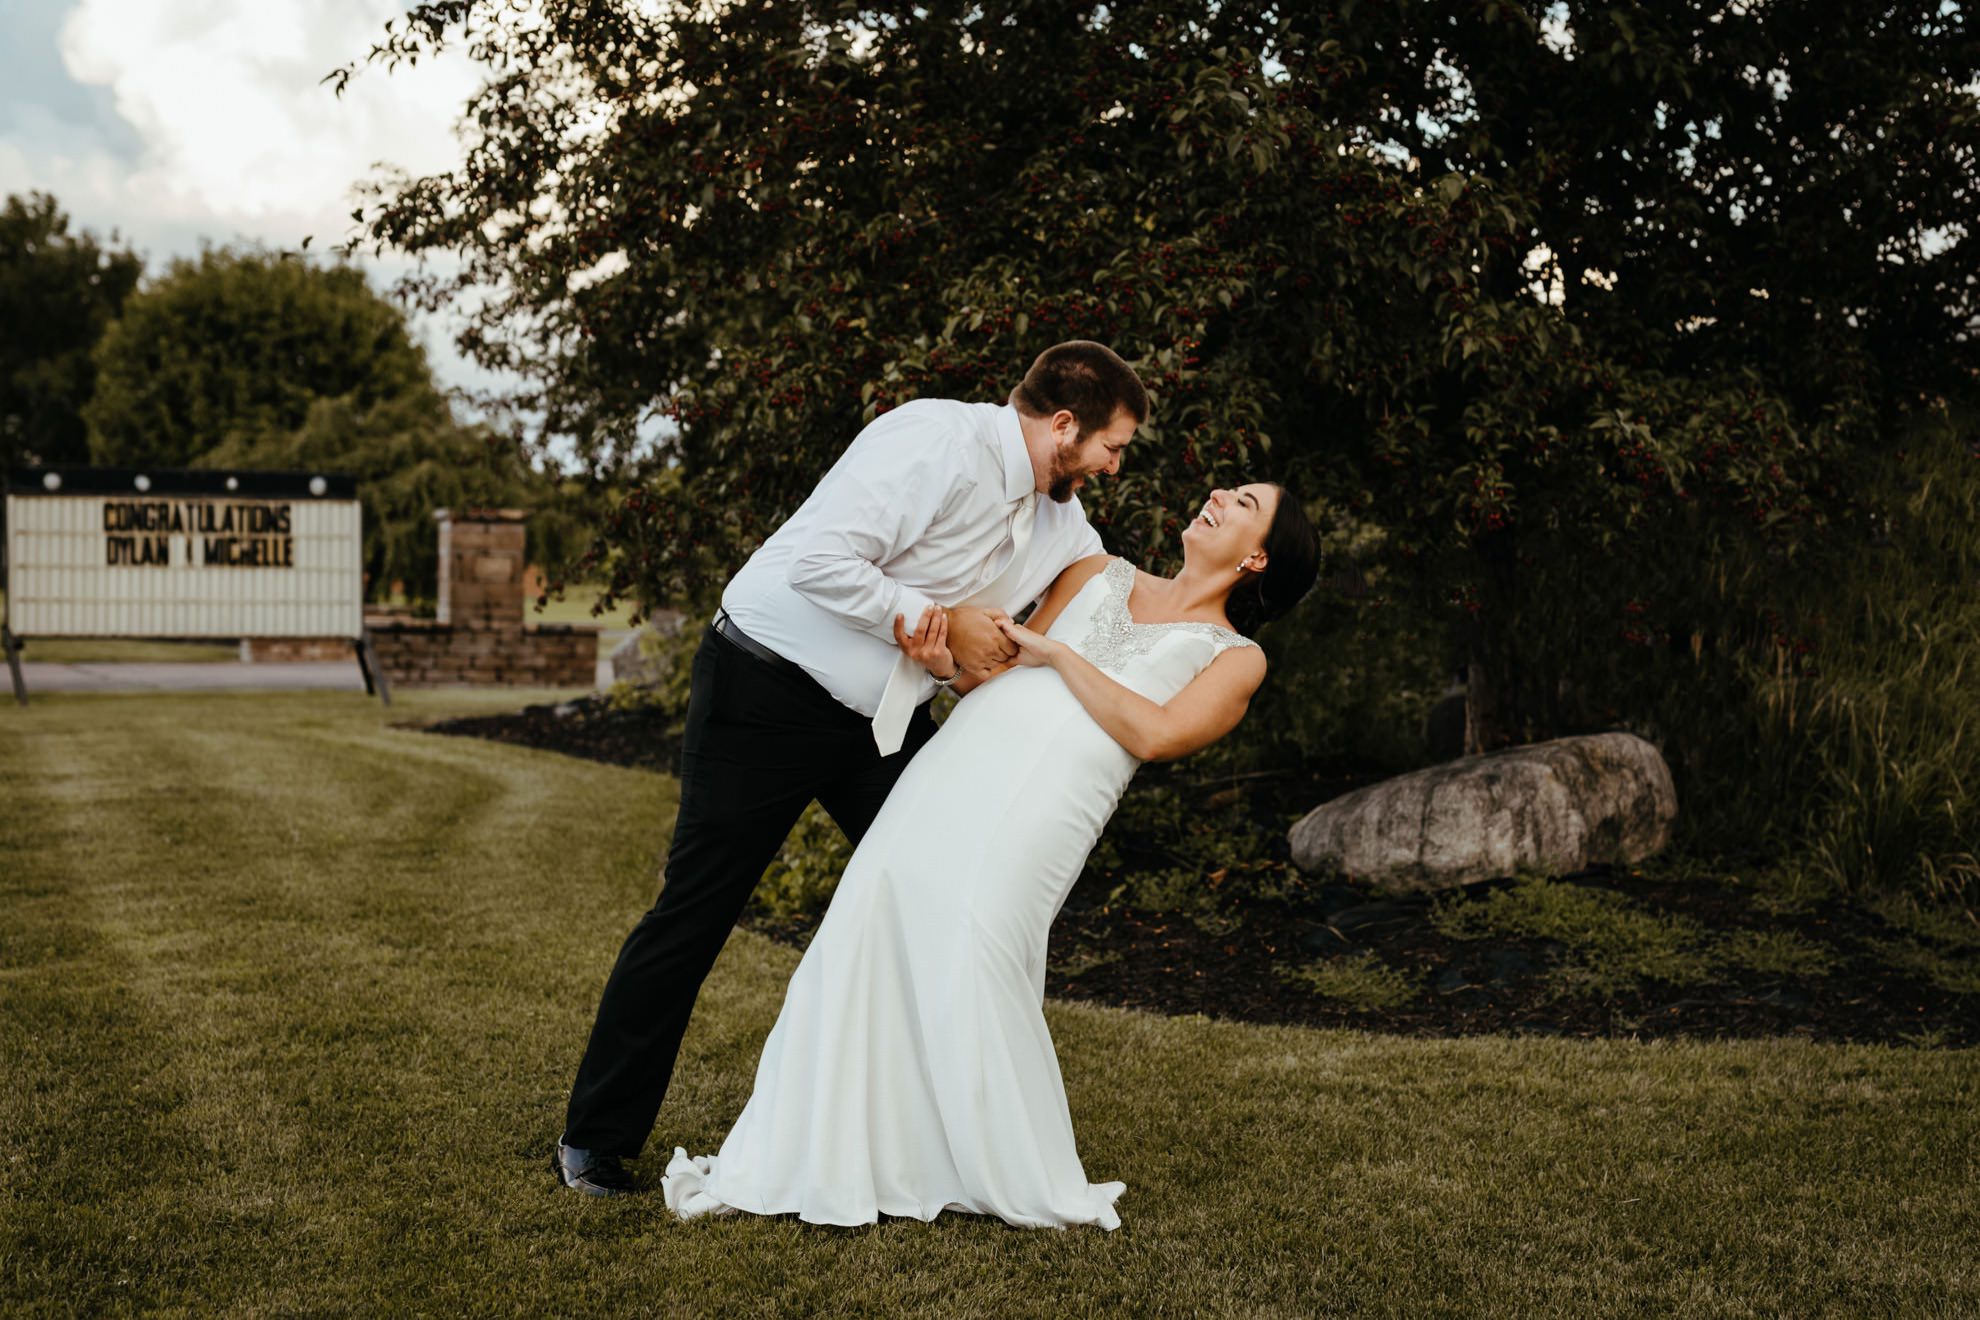 groom dipping bride while dancing in grass